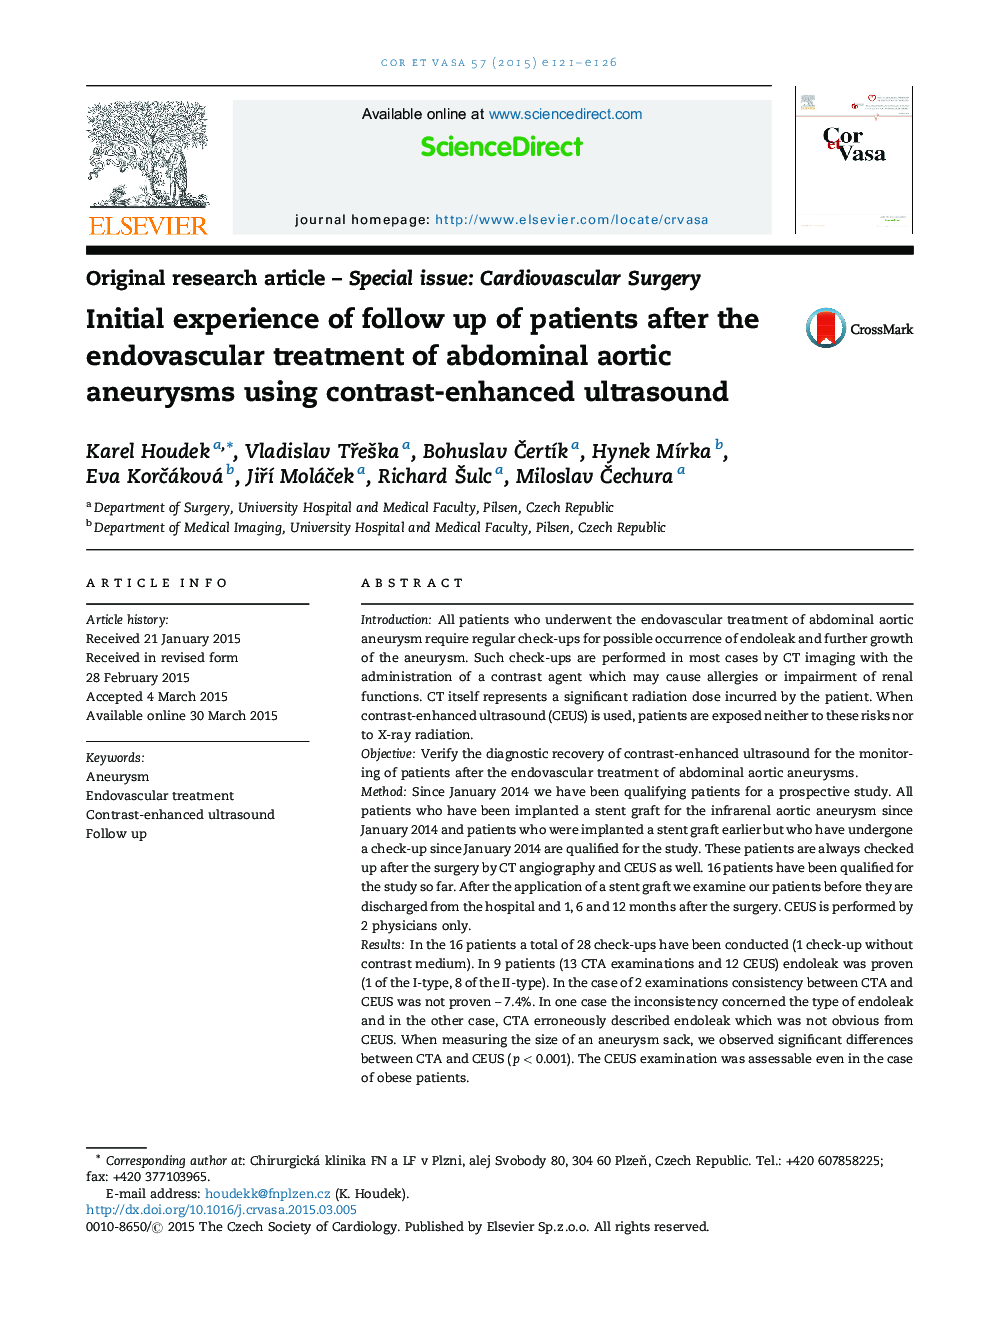 Initial experience of follow up of patients after the endovascular treatment of abdominal aortic aneurysms using contrast-enhanced ultrasound